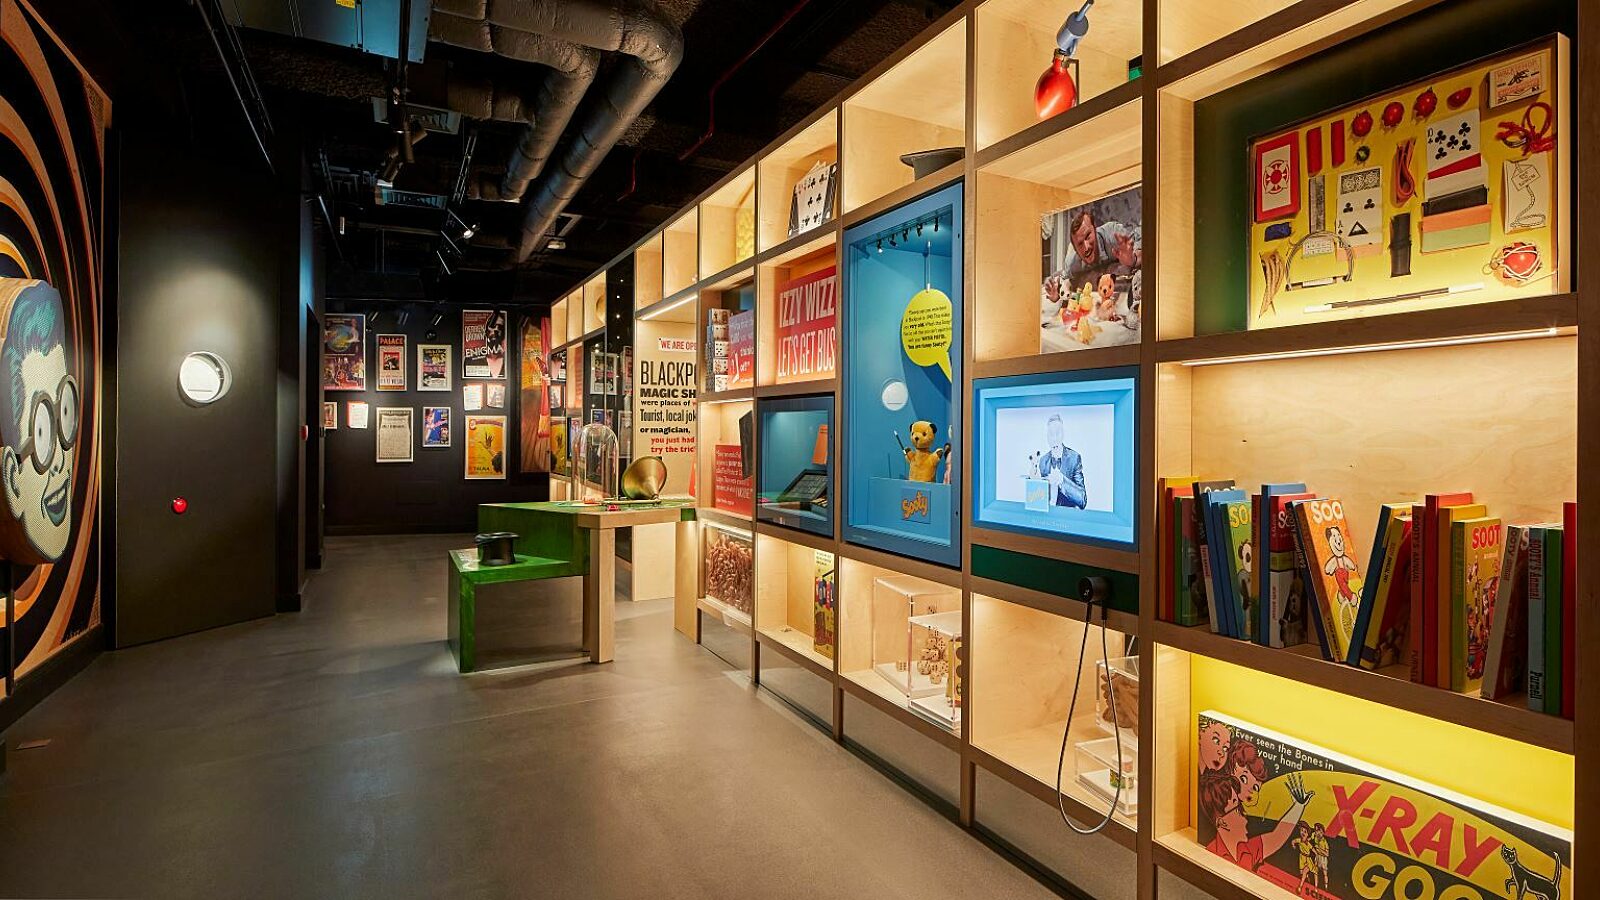 Images shows inside the How's Tricks gallery. Book cases with objects related to magic and joke shops